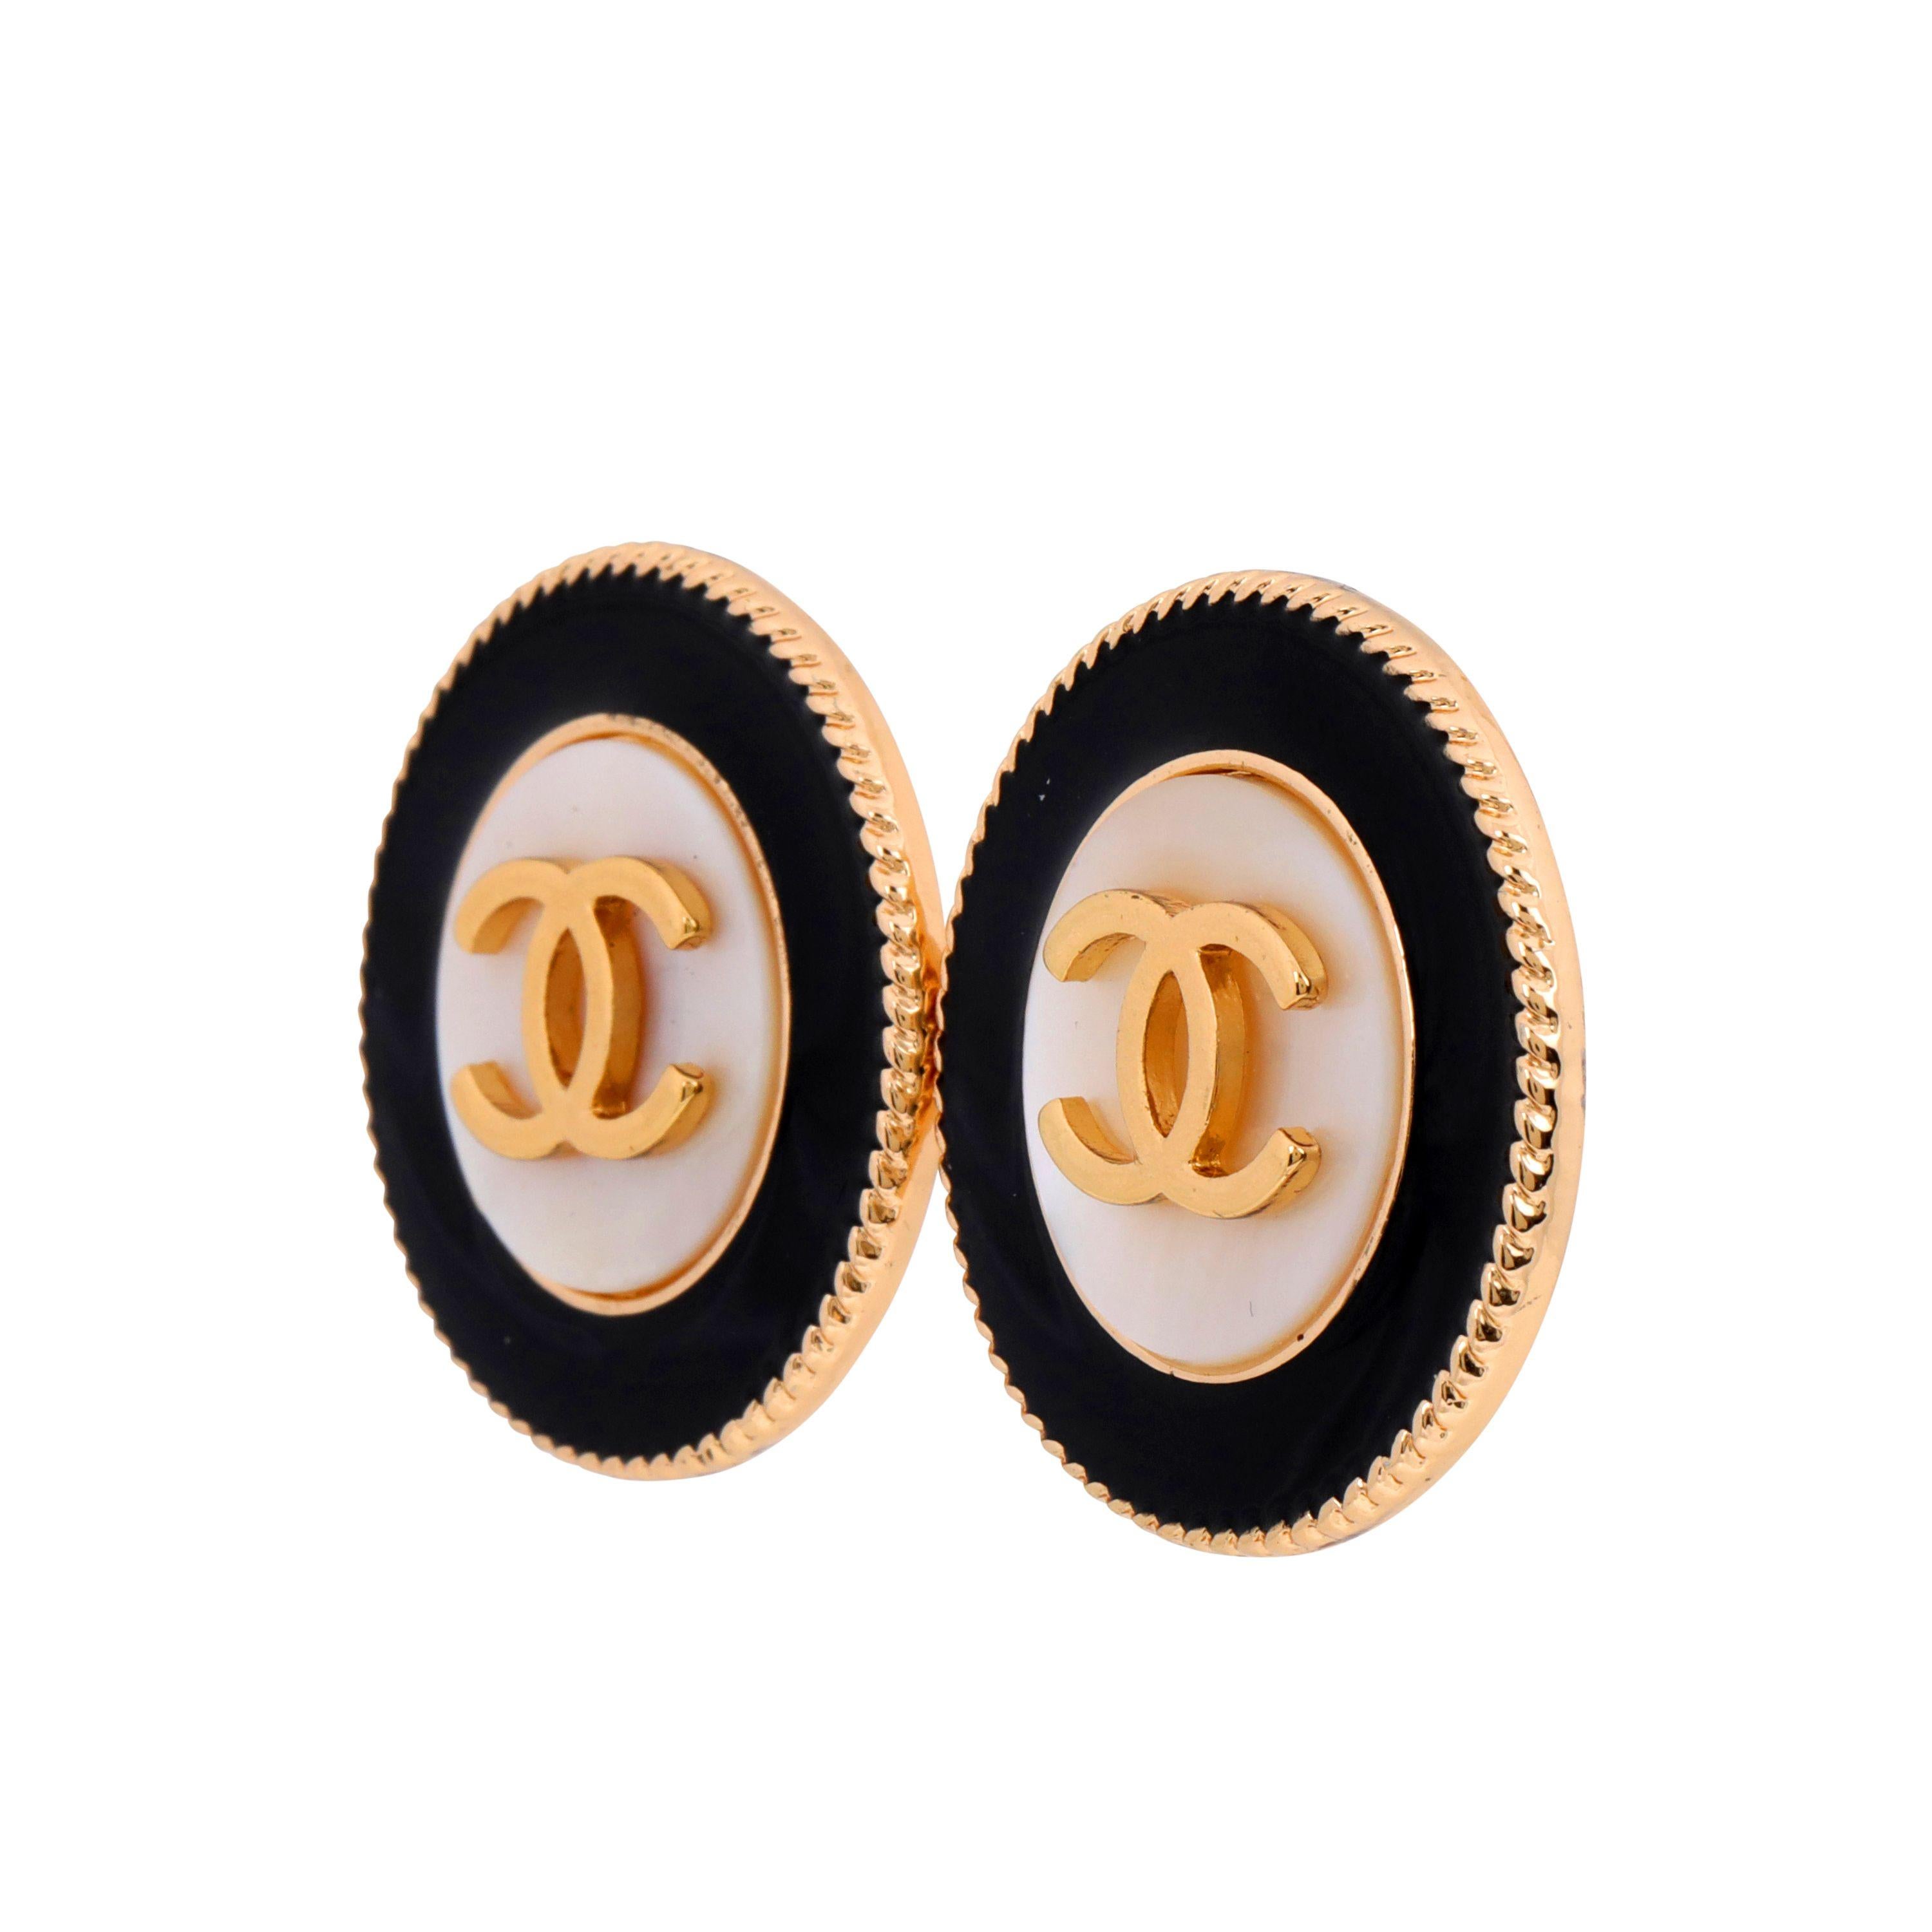 Chanel Black and White Pearlized CC Pierced Earrings In Good Condition For Sale In Palm Beach, FL